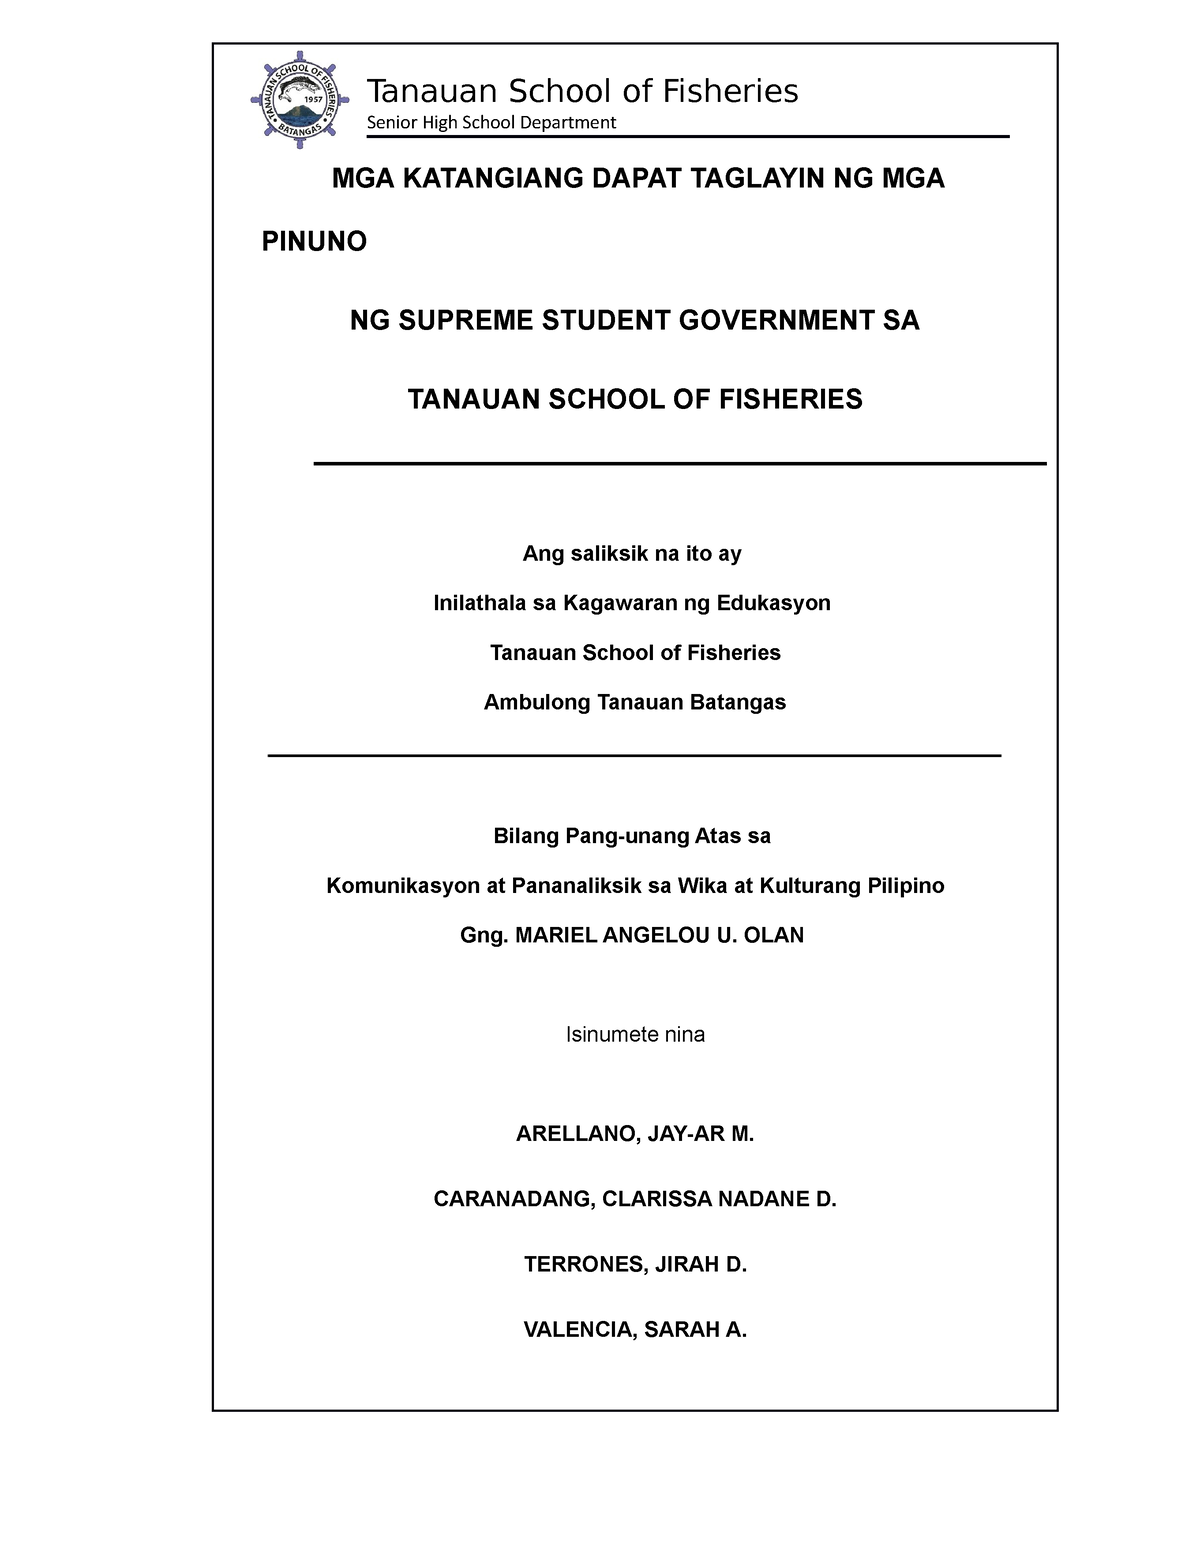 thesis title for fisheries in the philippines